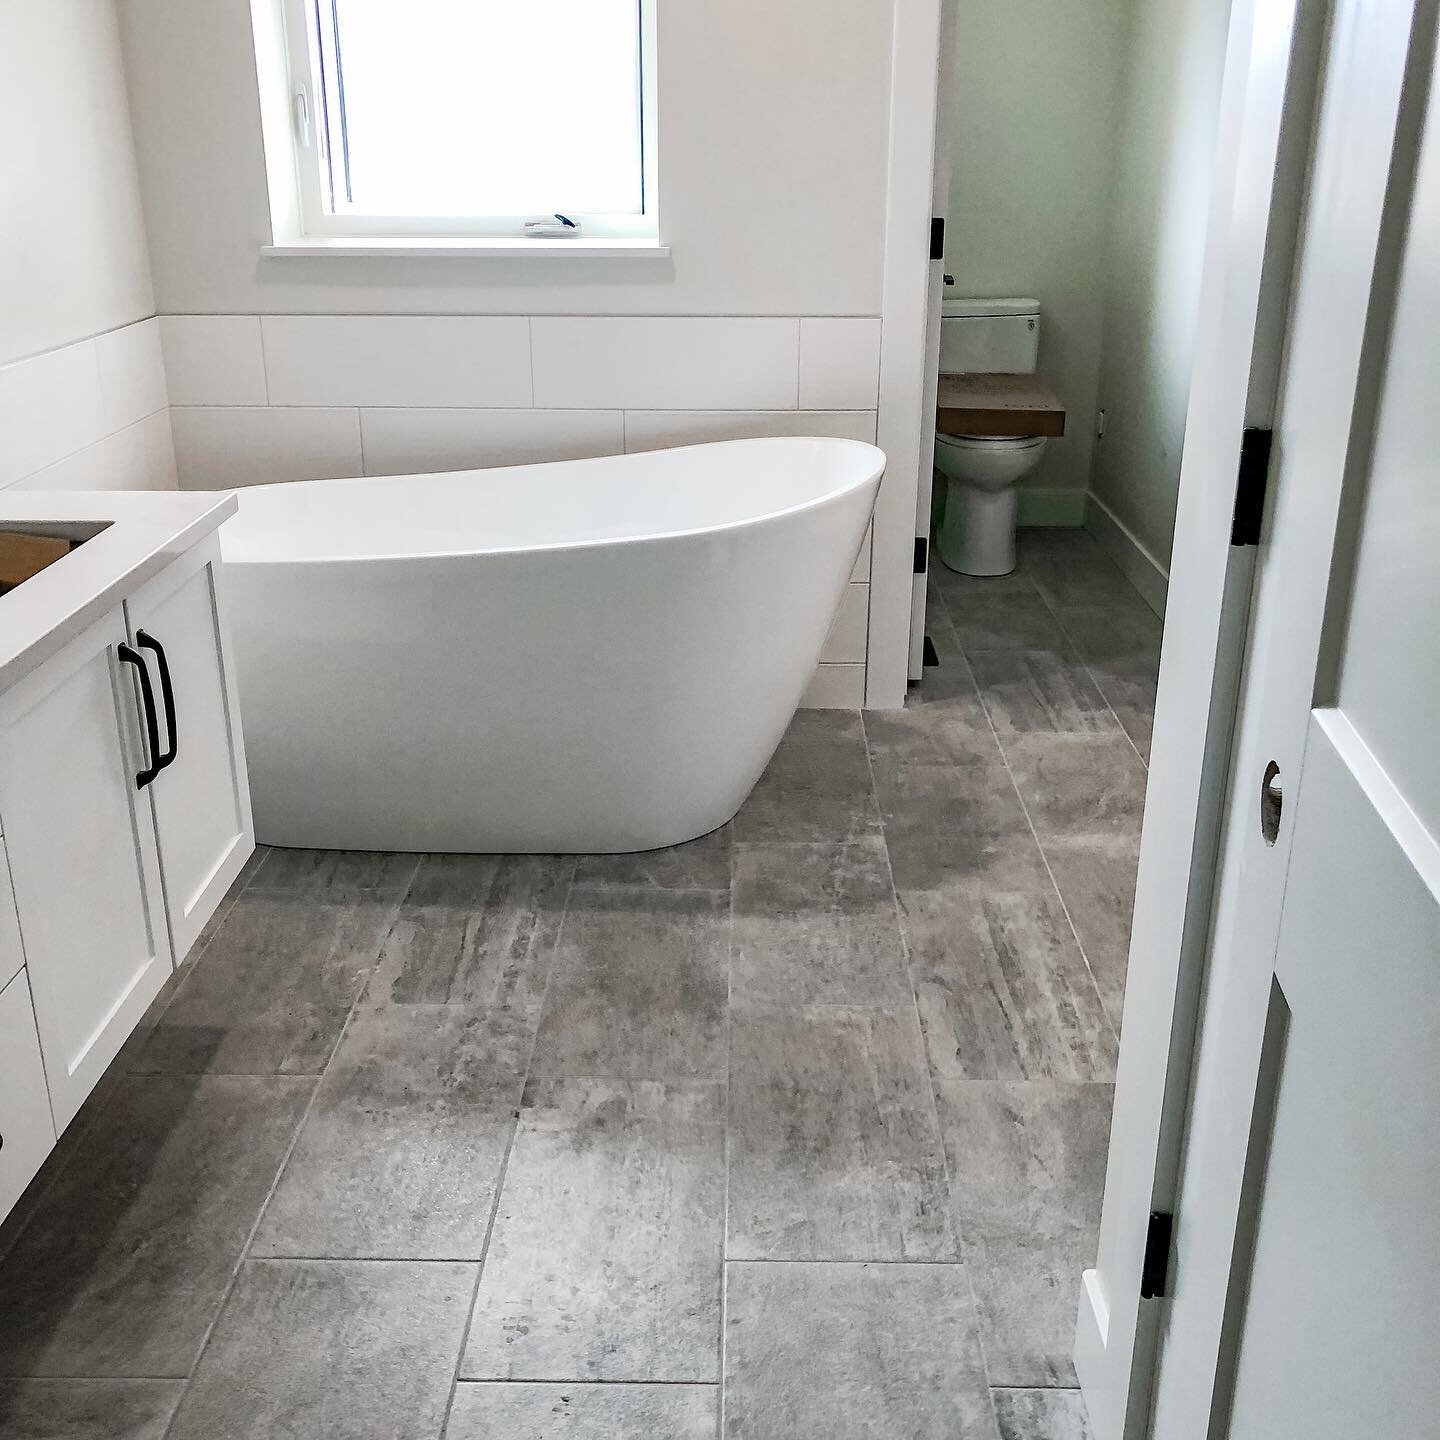 Working on a Roman tub install! 
Are you a fan of Roman tubs or the standard bath tubs? Comment 👇below